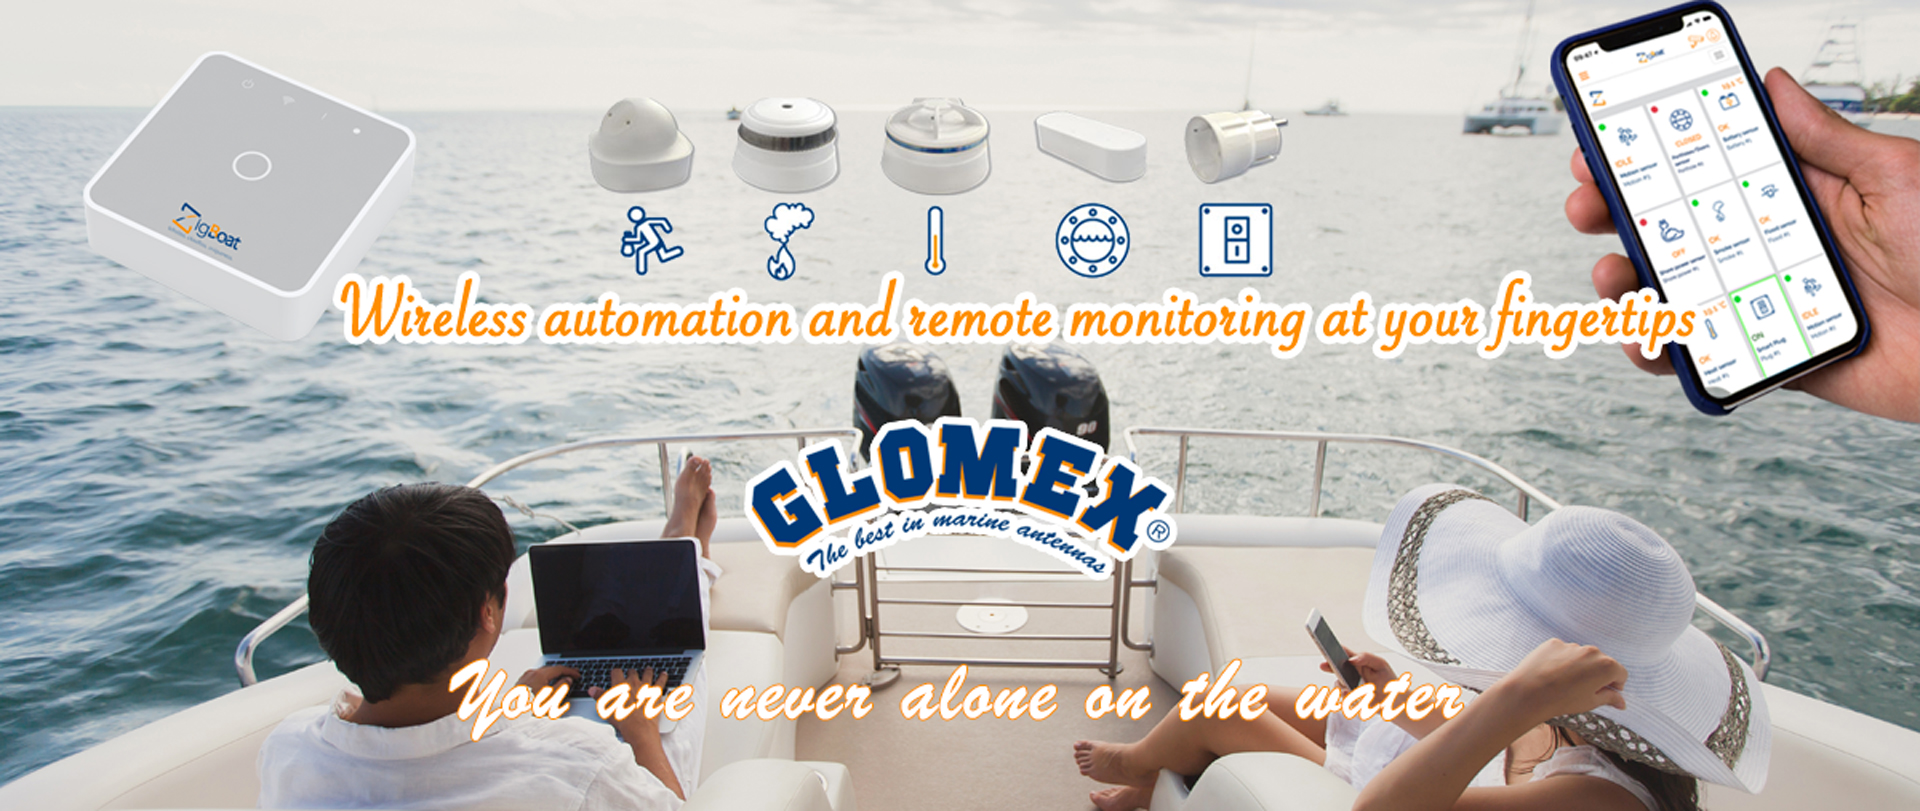 ZigBoat™ - Glomex Marine Antennas - Wireless Automation and monitoring on your fingertips